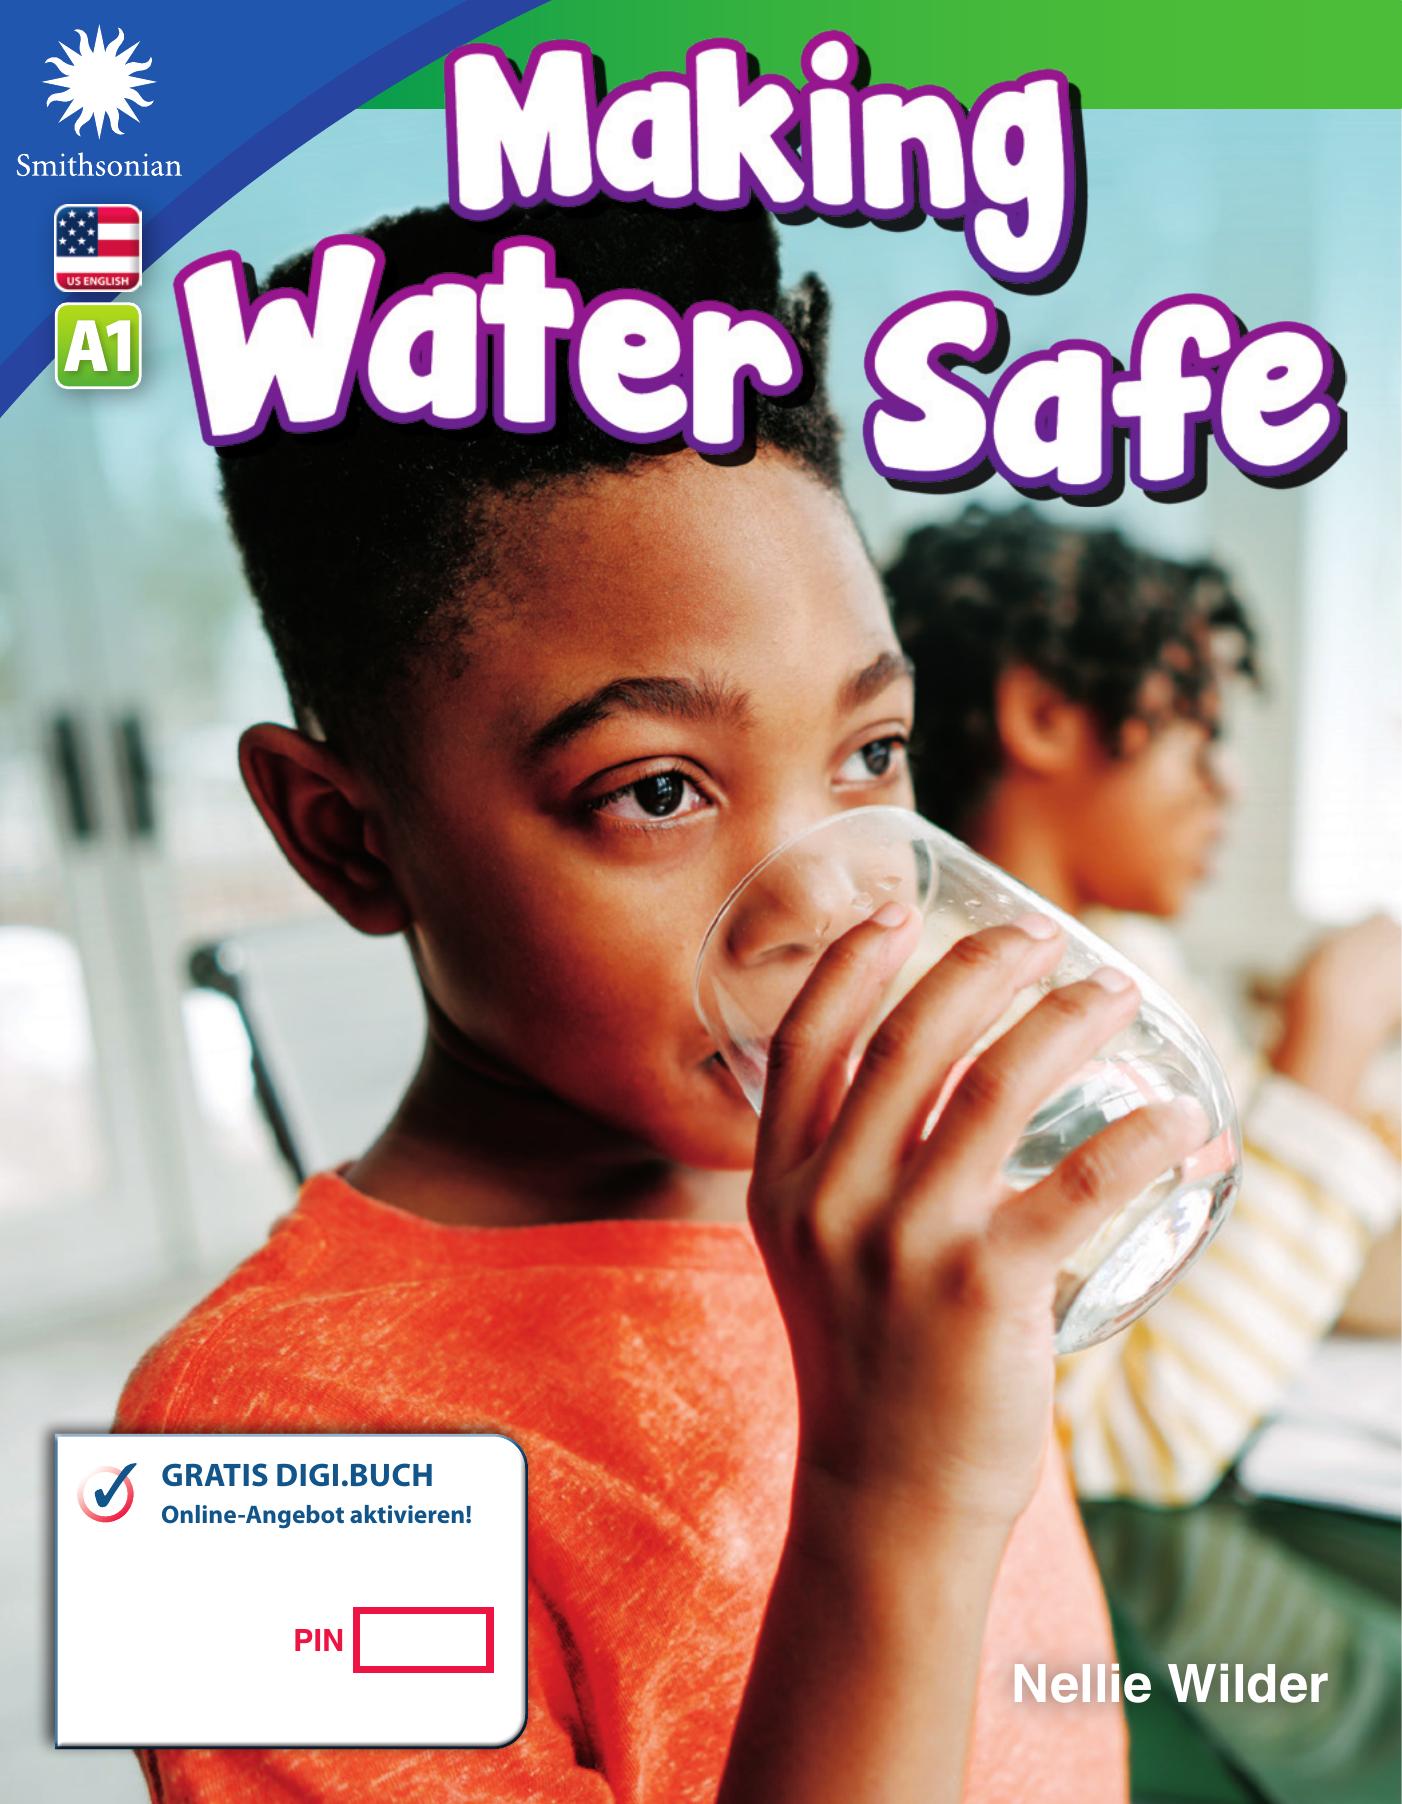 A1 – Making Water Safe